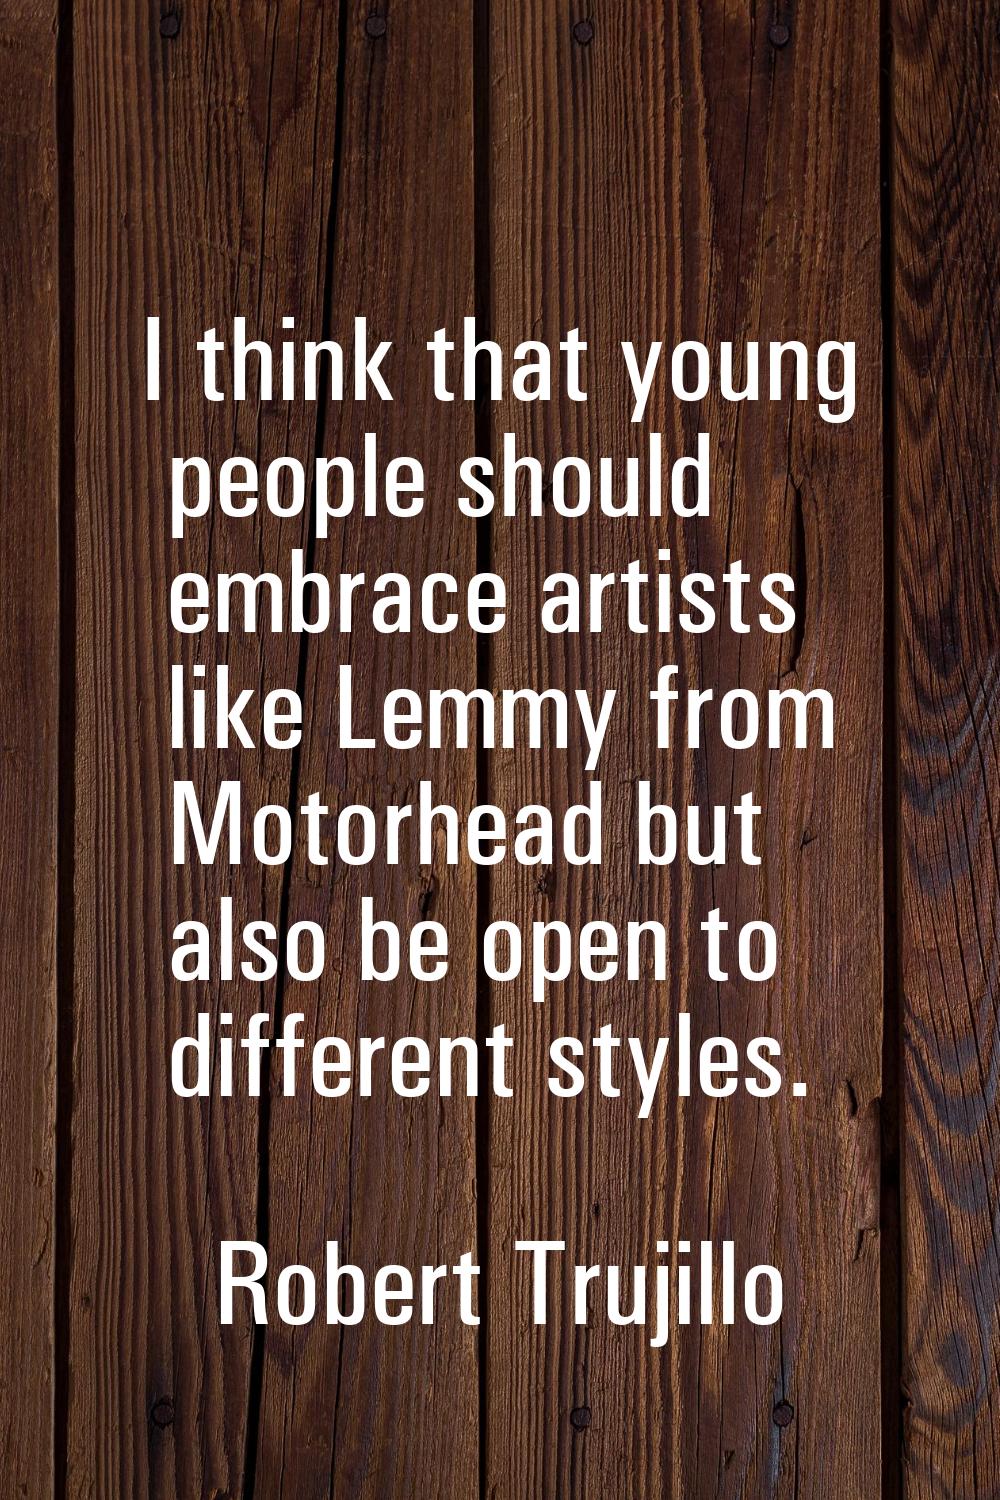 I think that young people should embrace artists like Lemmy from Motorhead but also be open to diff